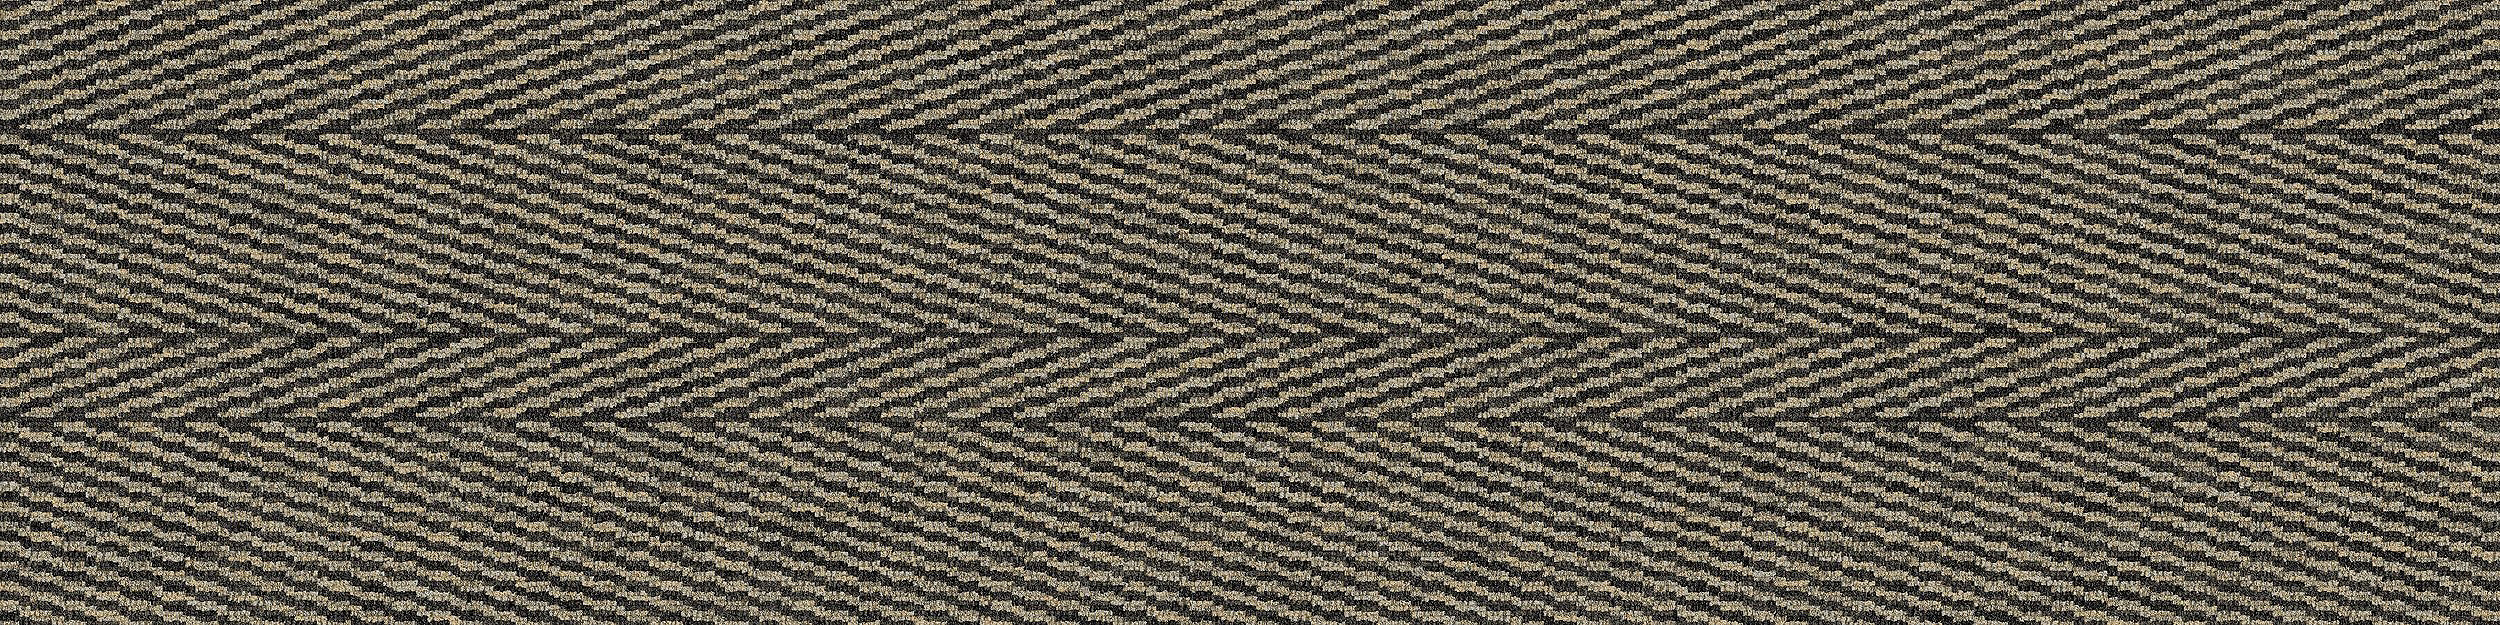 Stitch In Time Carpet Tile In Natural Stitch image number 5